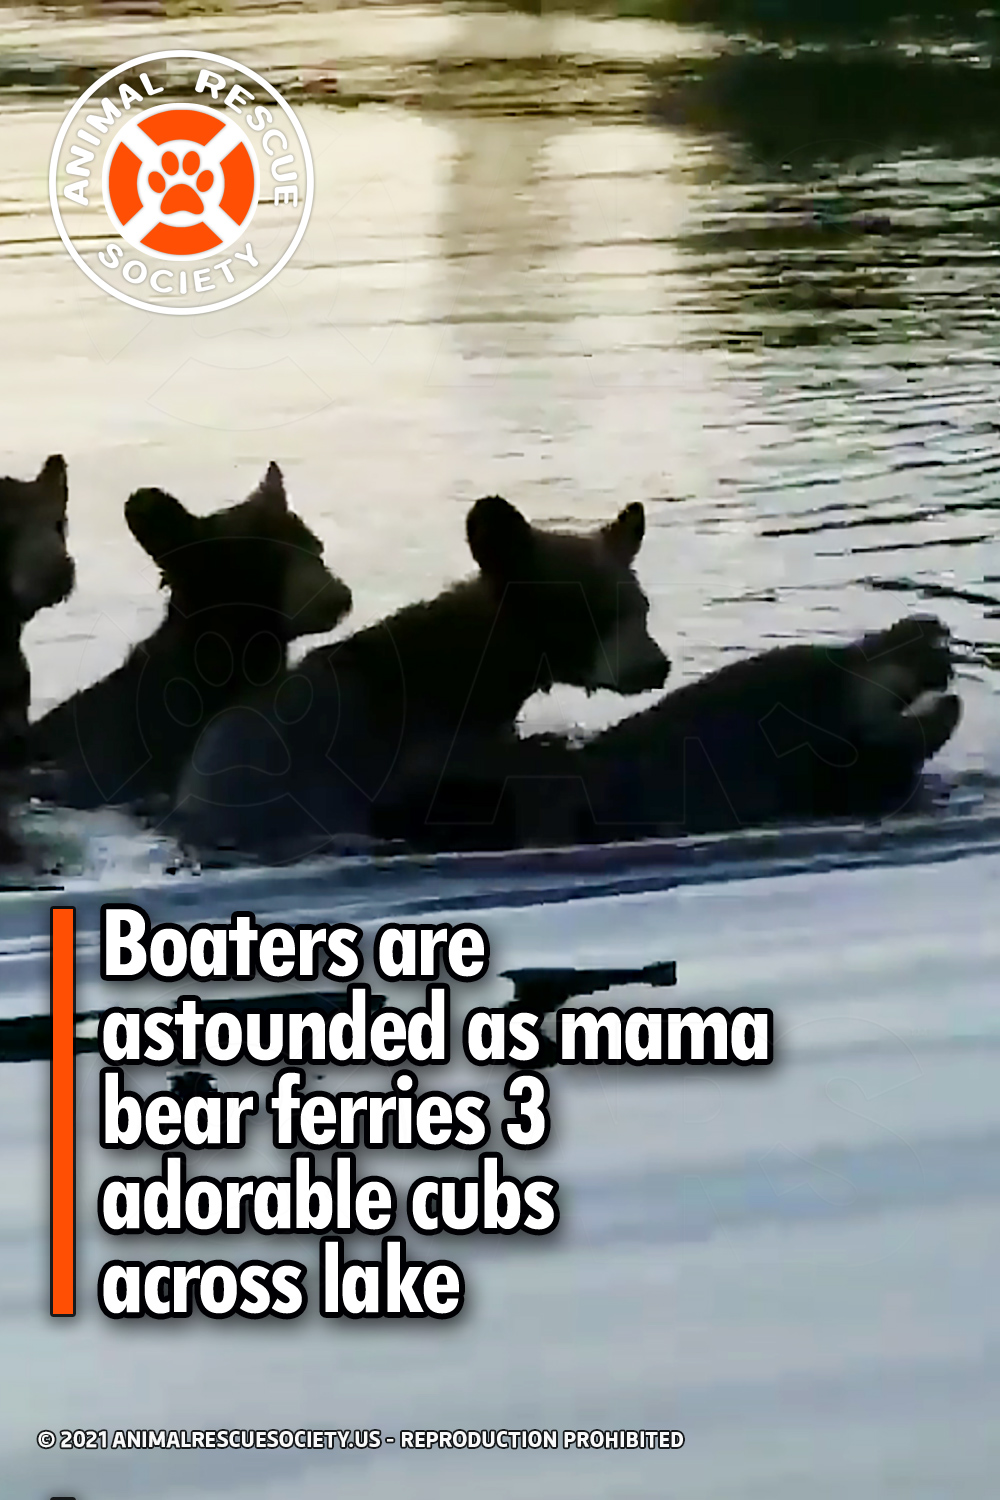 Boaters are astounded as mama bear ferries 3 adorable cubs across lake